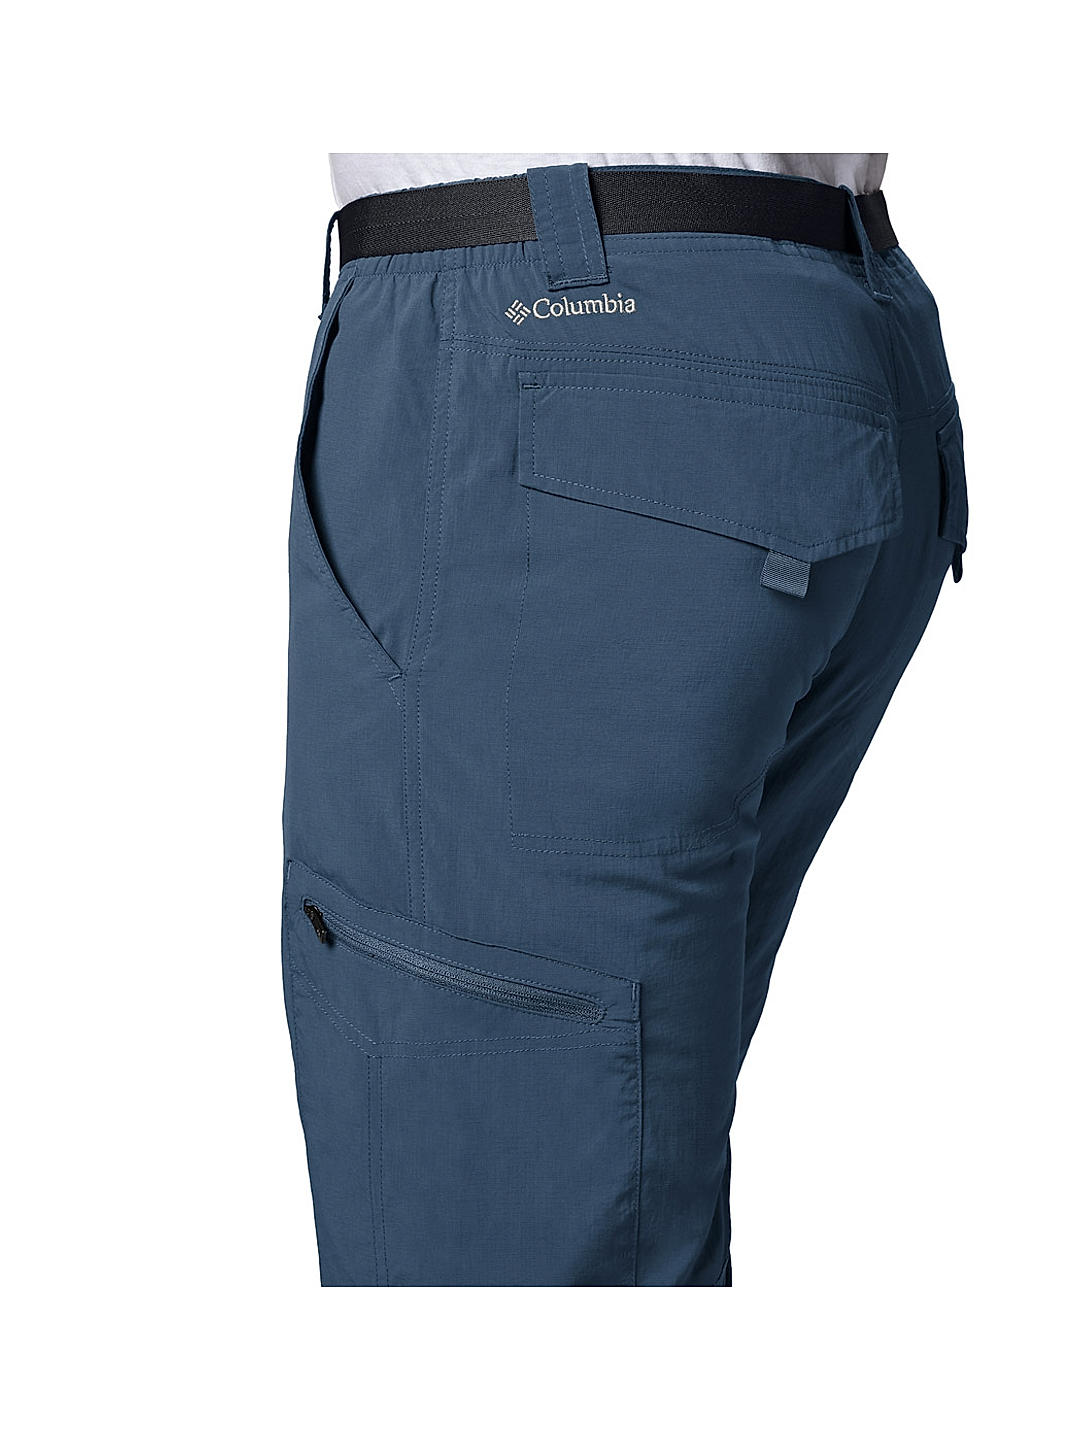 Columbia Cargos Trousers  Buy Columbia Cargos Trousers online in India